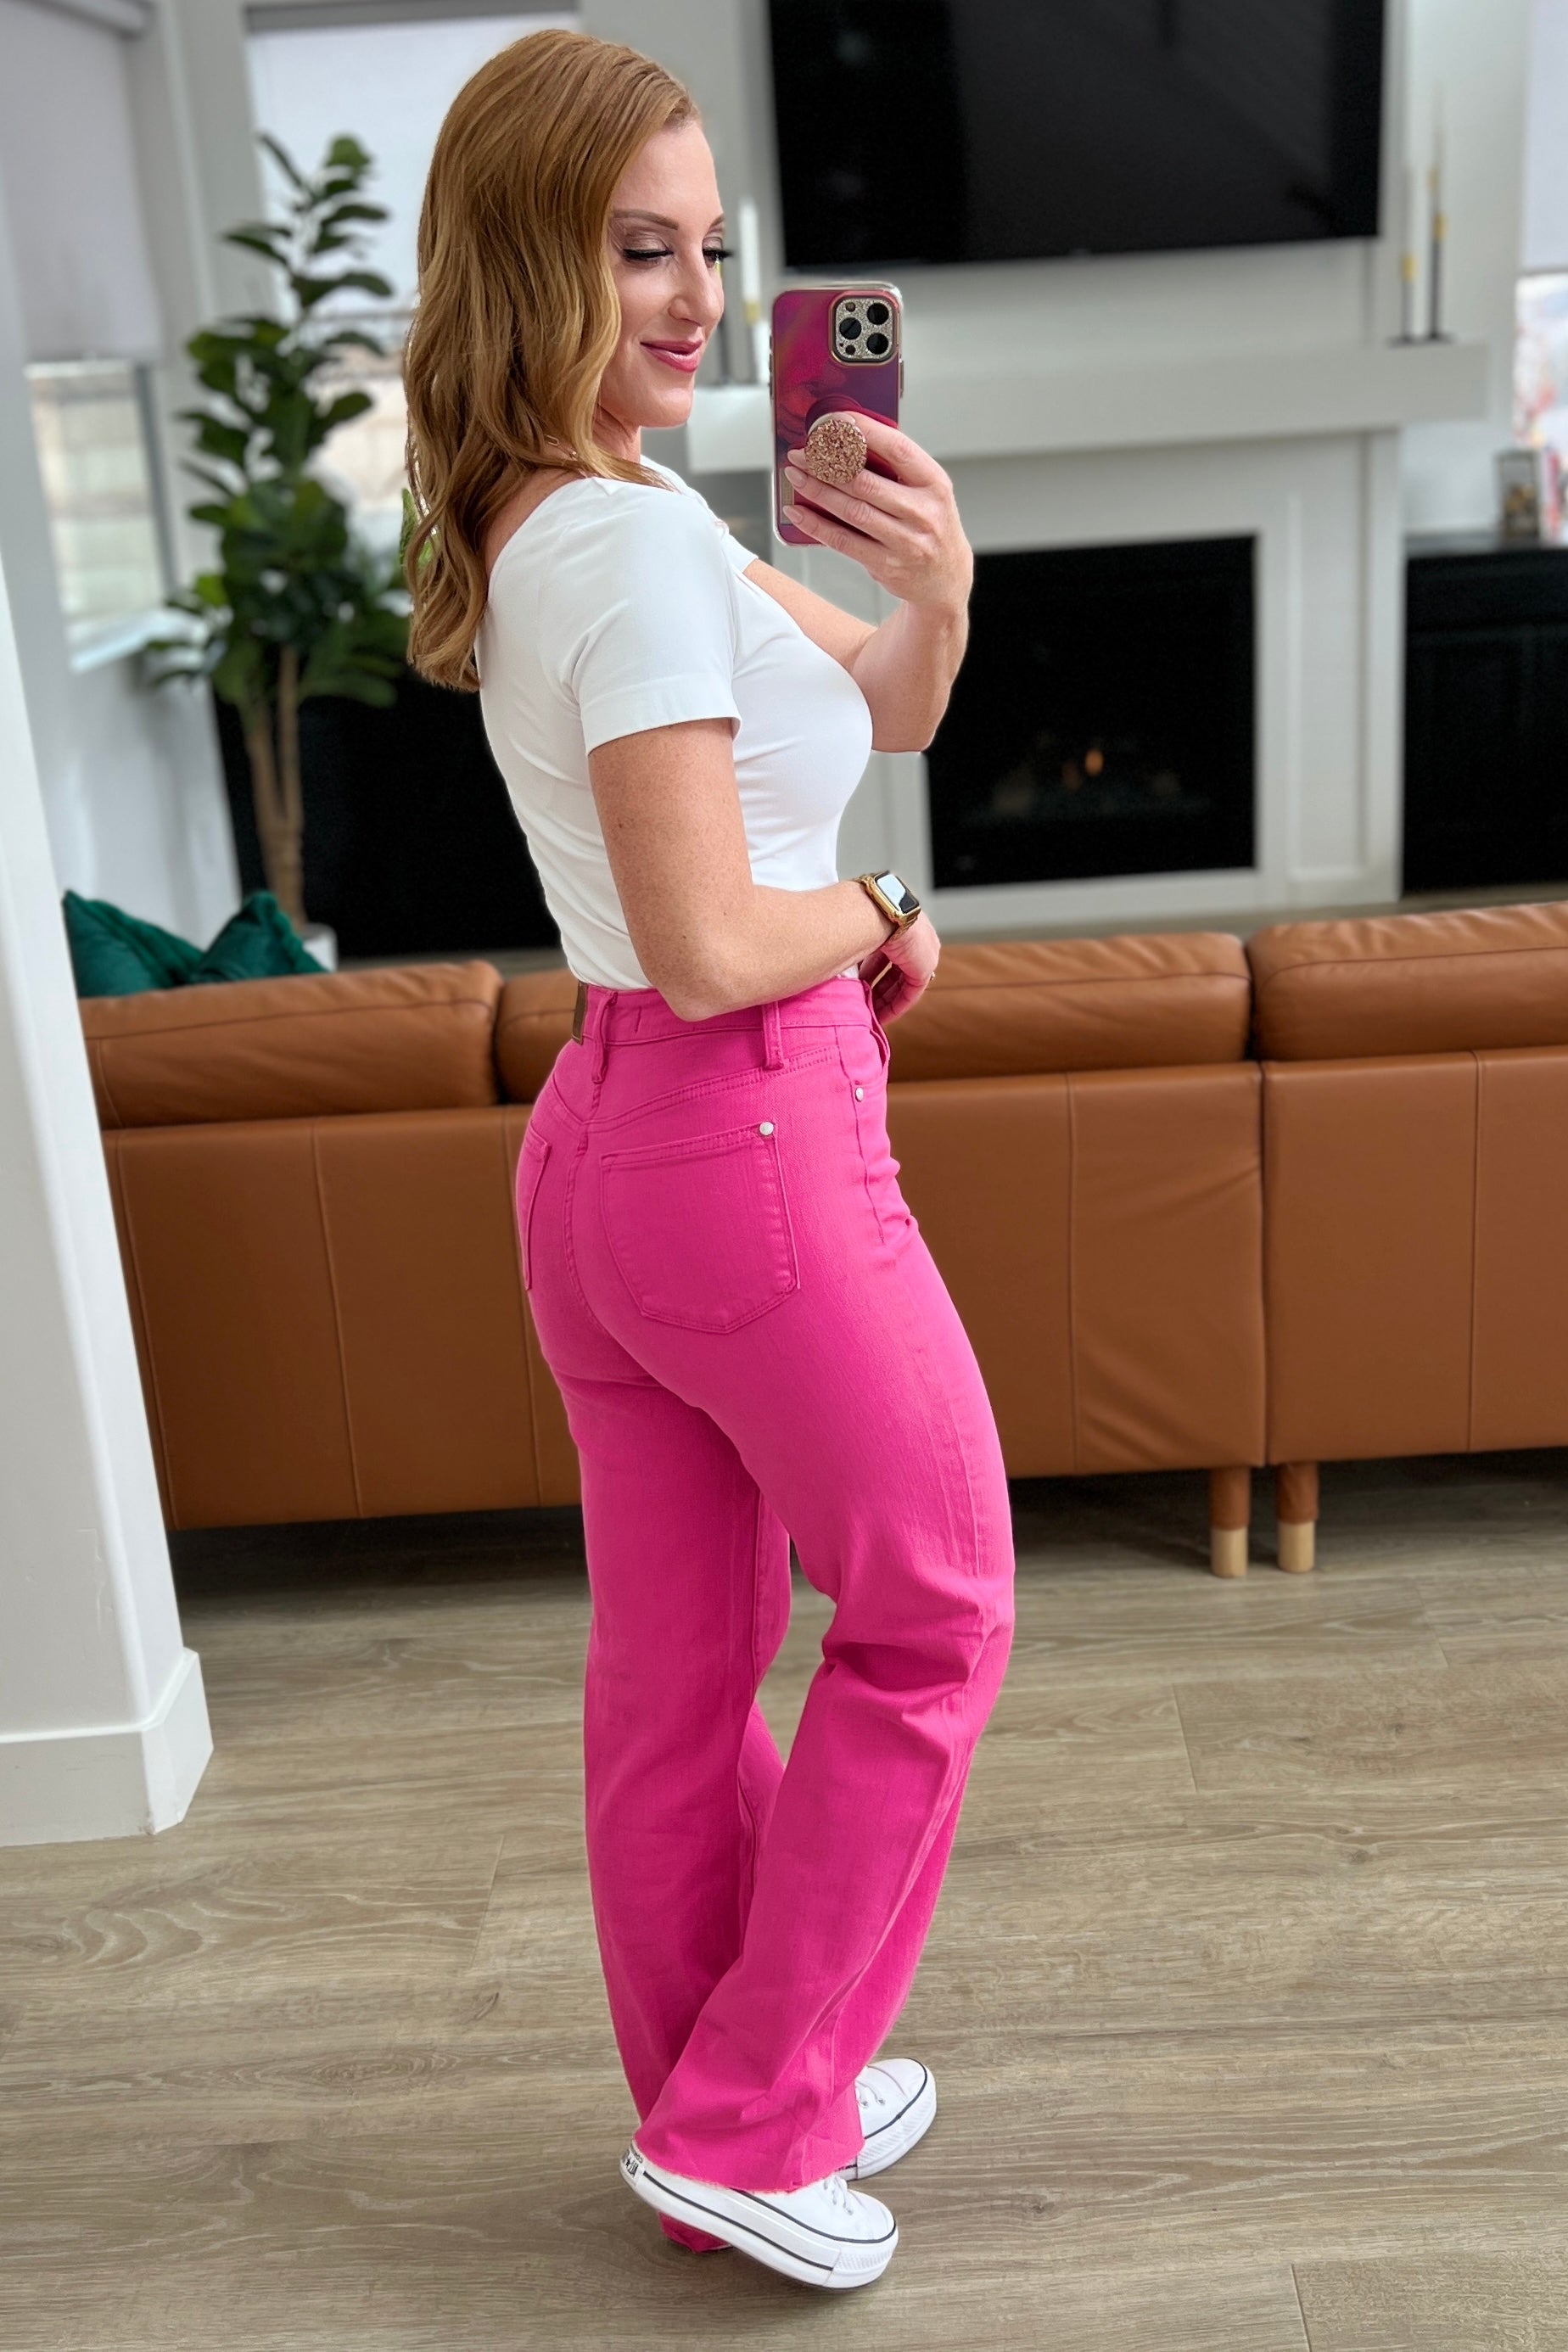 Barbara High Rise Pink Dyed 90's Straight Jeans up to 24W by Judy Blue